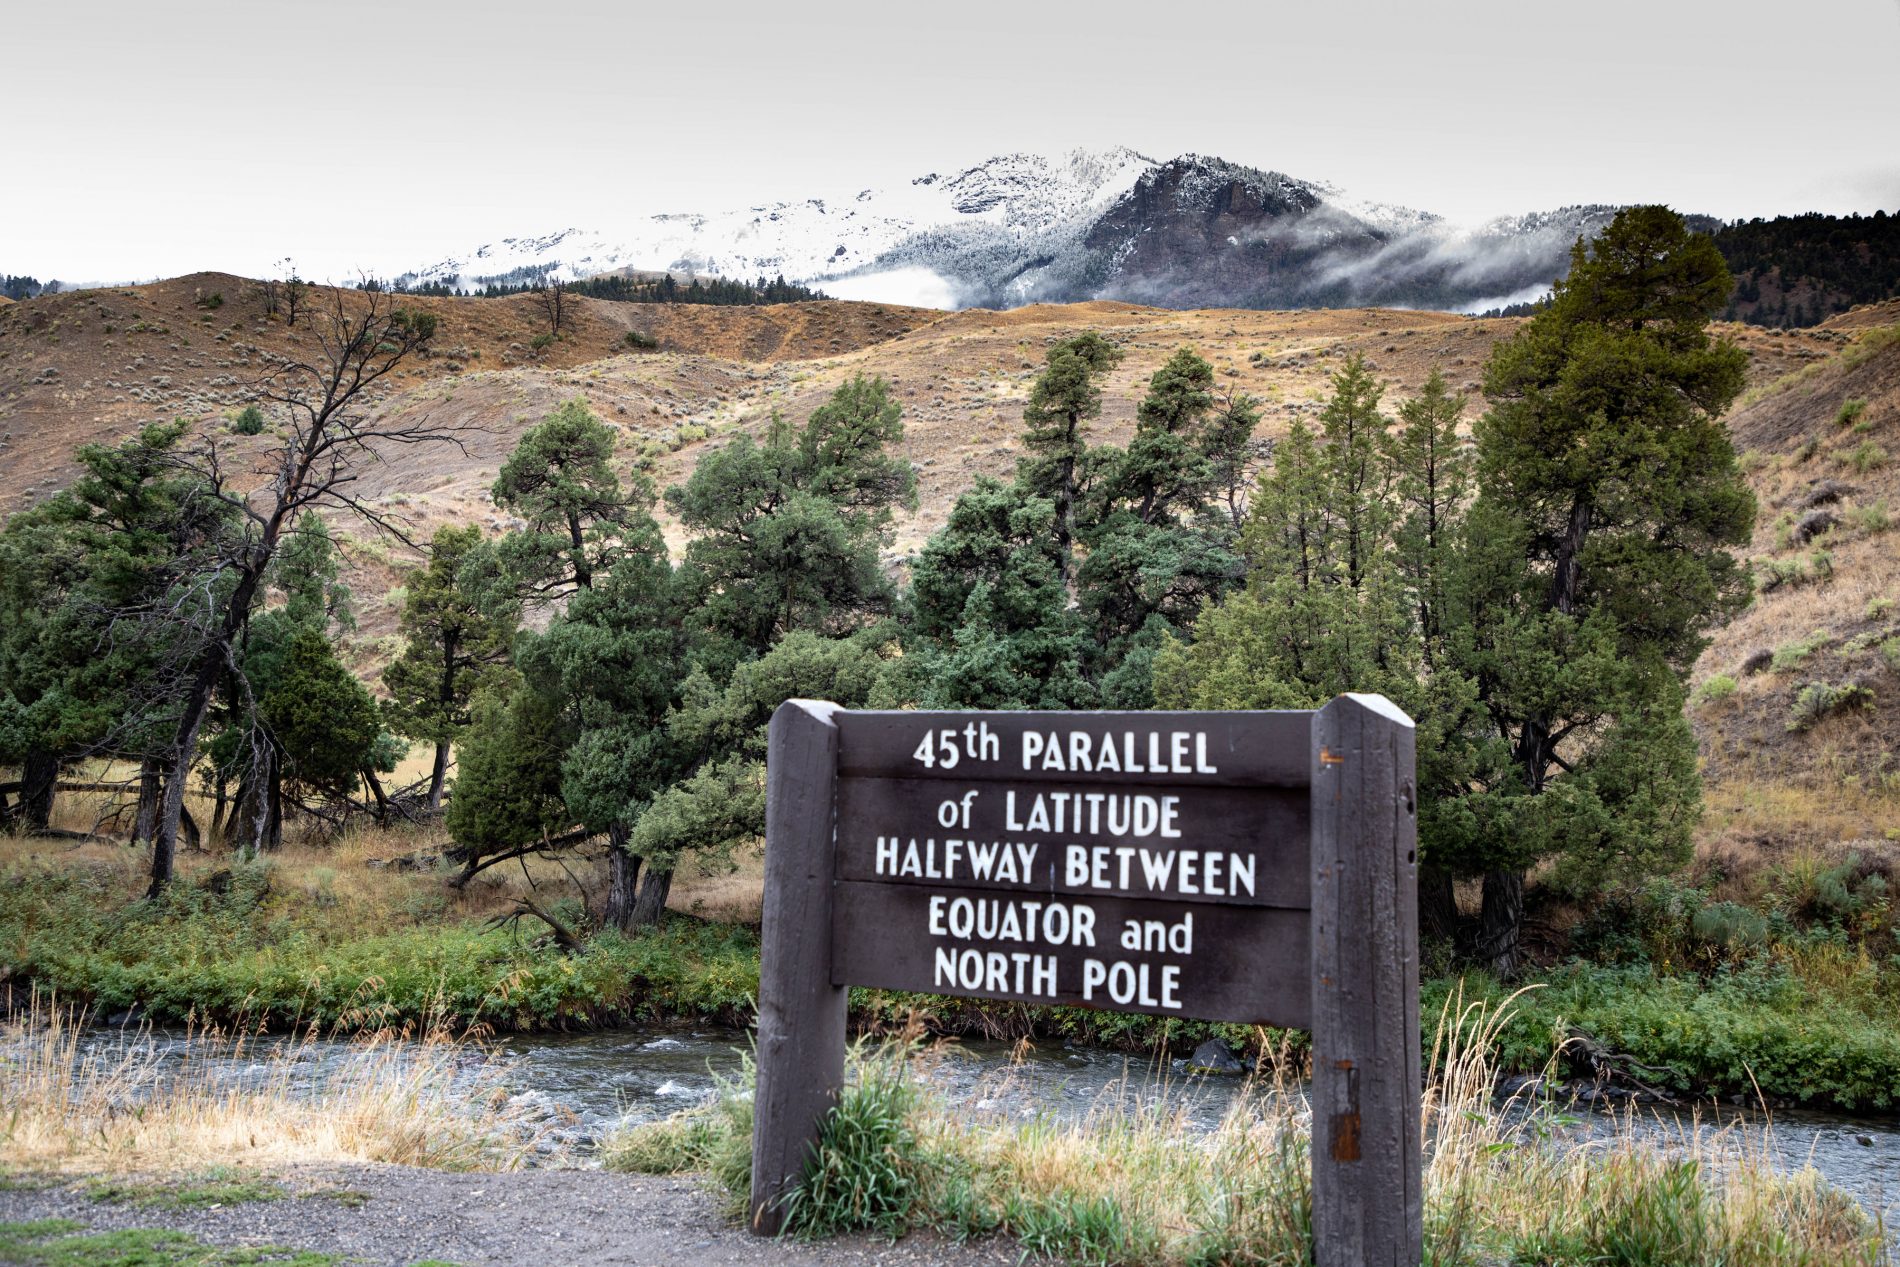 45th Parallel marker near the Northern Entrance to Yellowstone with snowcapped mountains in the background.